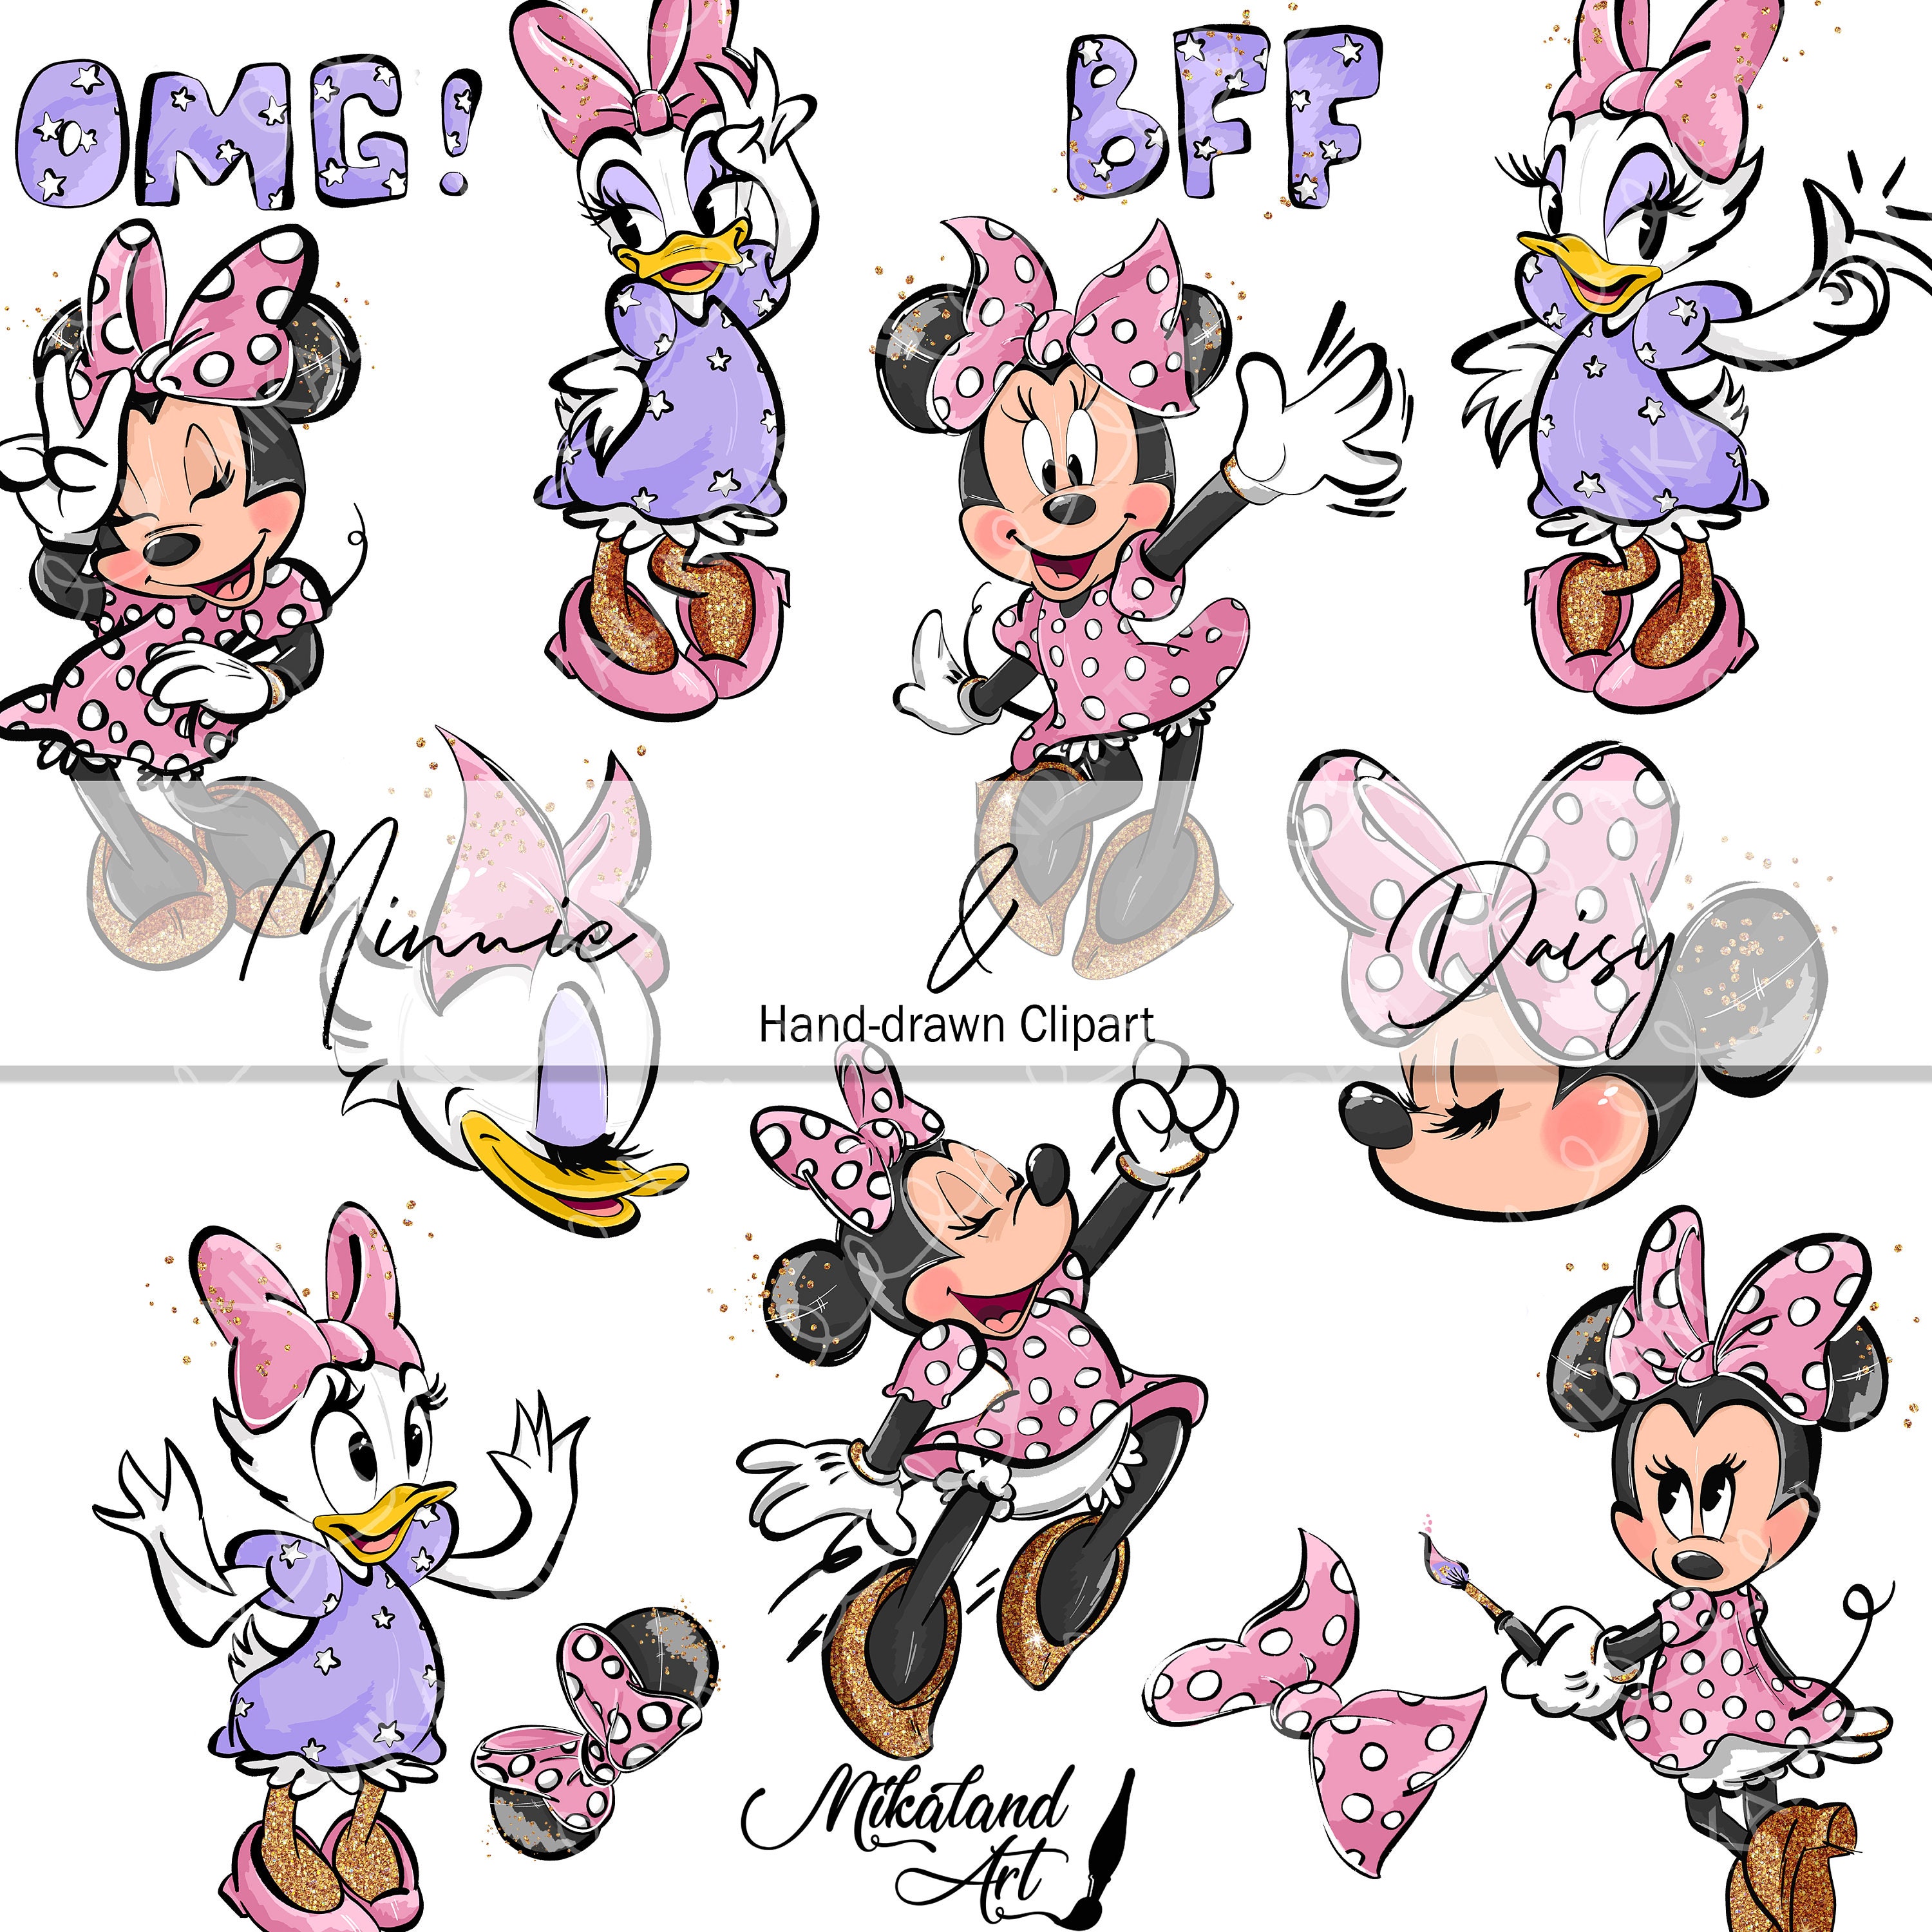 Minnie Mouse Daisy Duck Best Friends Forever, Hand-drawn Clip Art